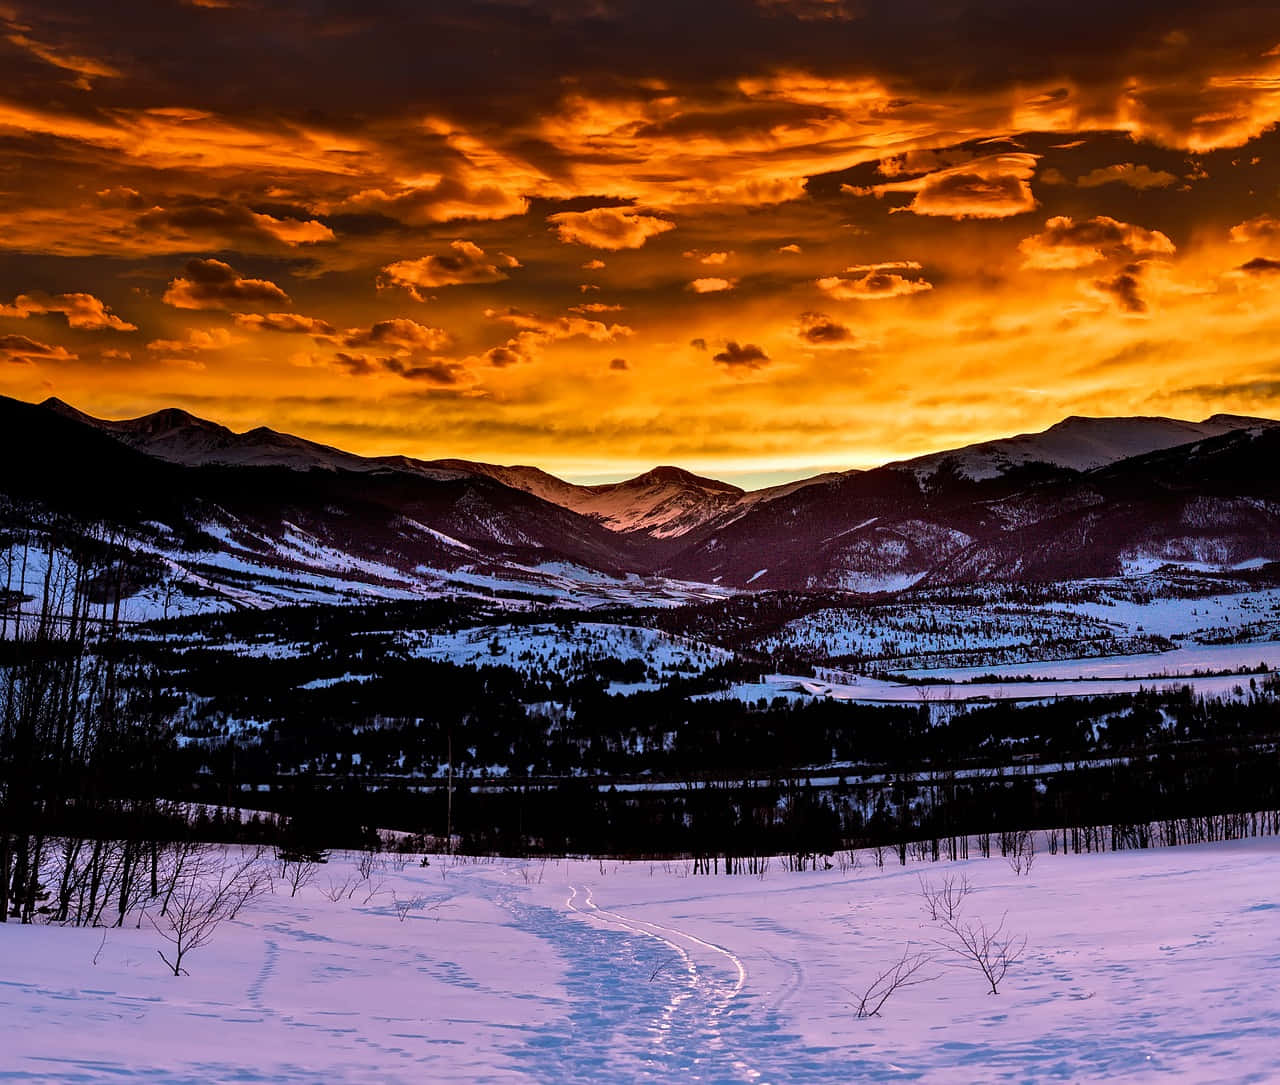 Take in the Beauty of Colorado's Majestic Mountains